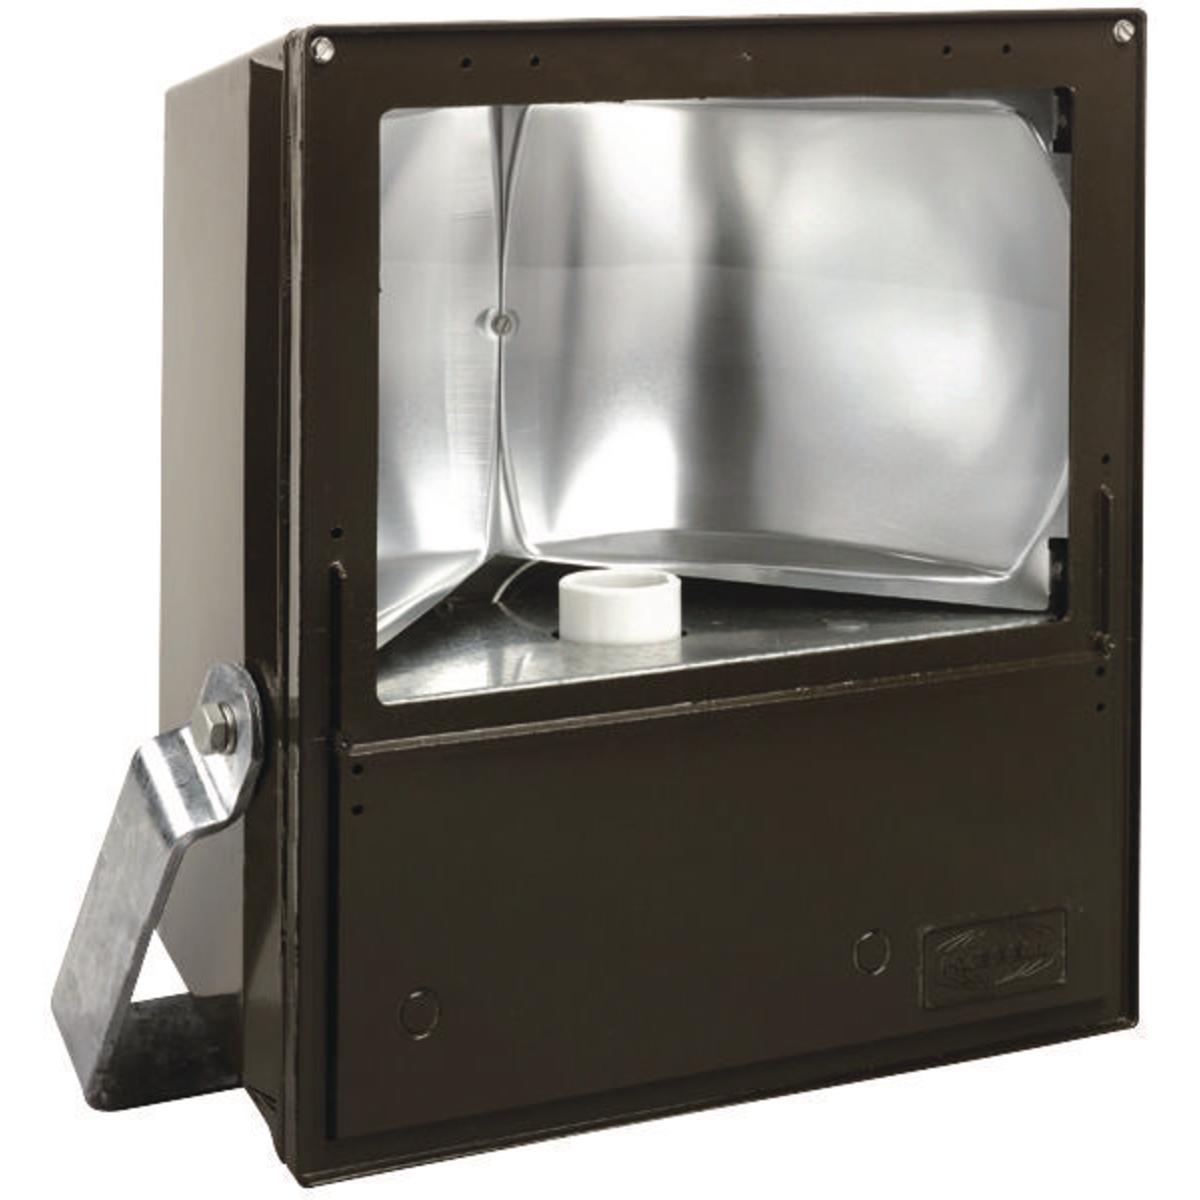 Hubbell KFP320-76 KF Series - Aluminum 320 Watt Pulse Start Metal Halide Floodlight (Lamp Not Included) - Quadri-Volt (120/208/240/277V) At 60Hz  ; Rugged weathertight housing of copperfree aluminum with corrosion resistant bronze finish ; Wide beam distribution ; Thermal 